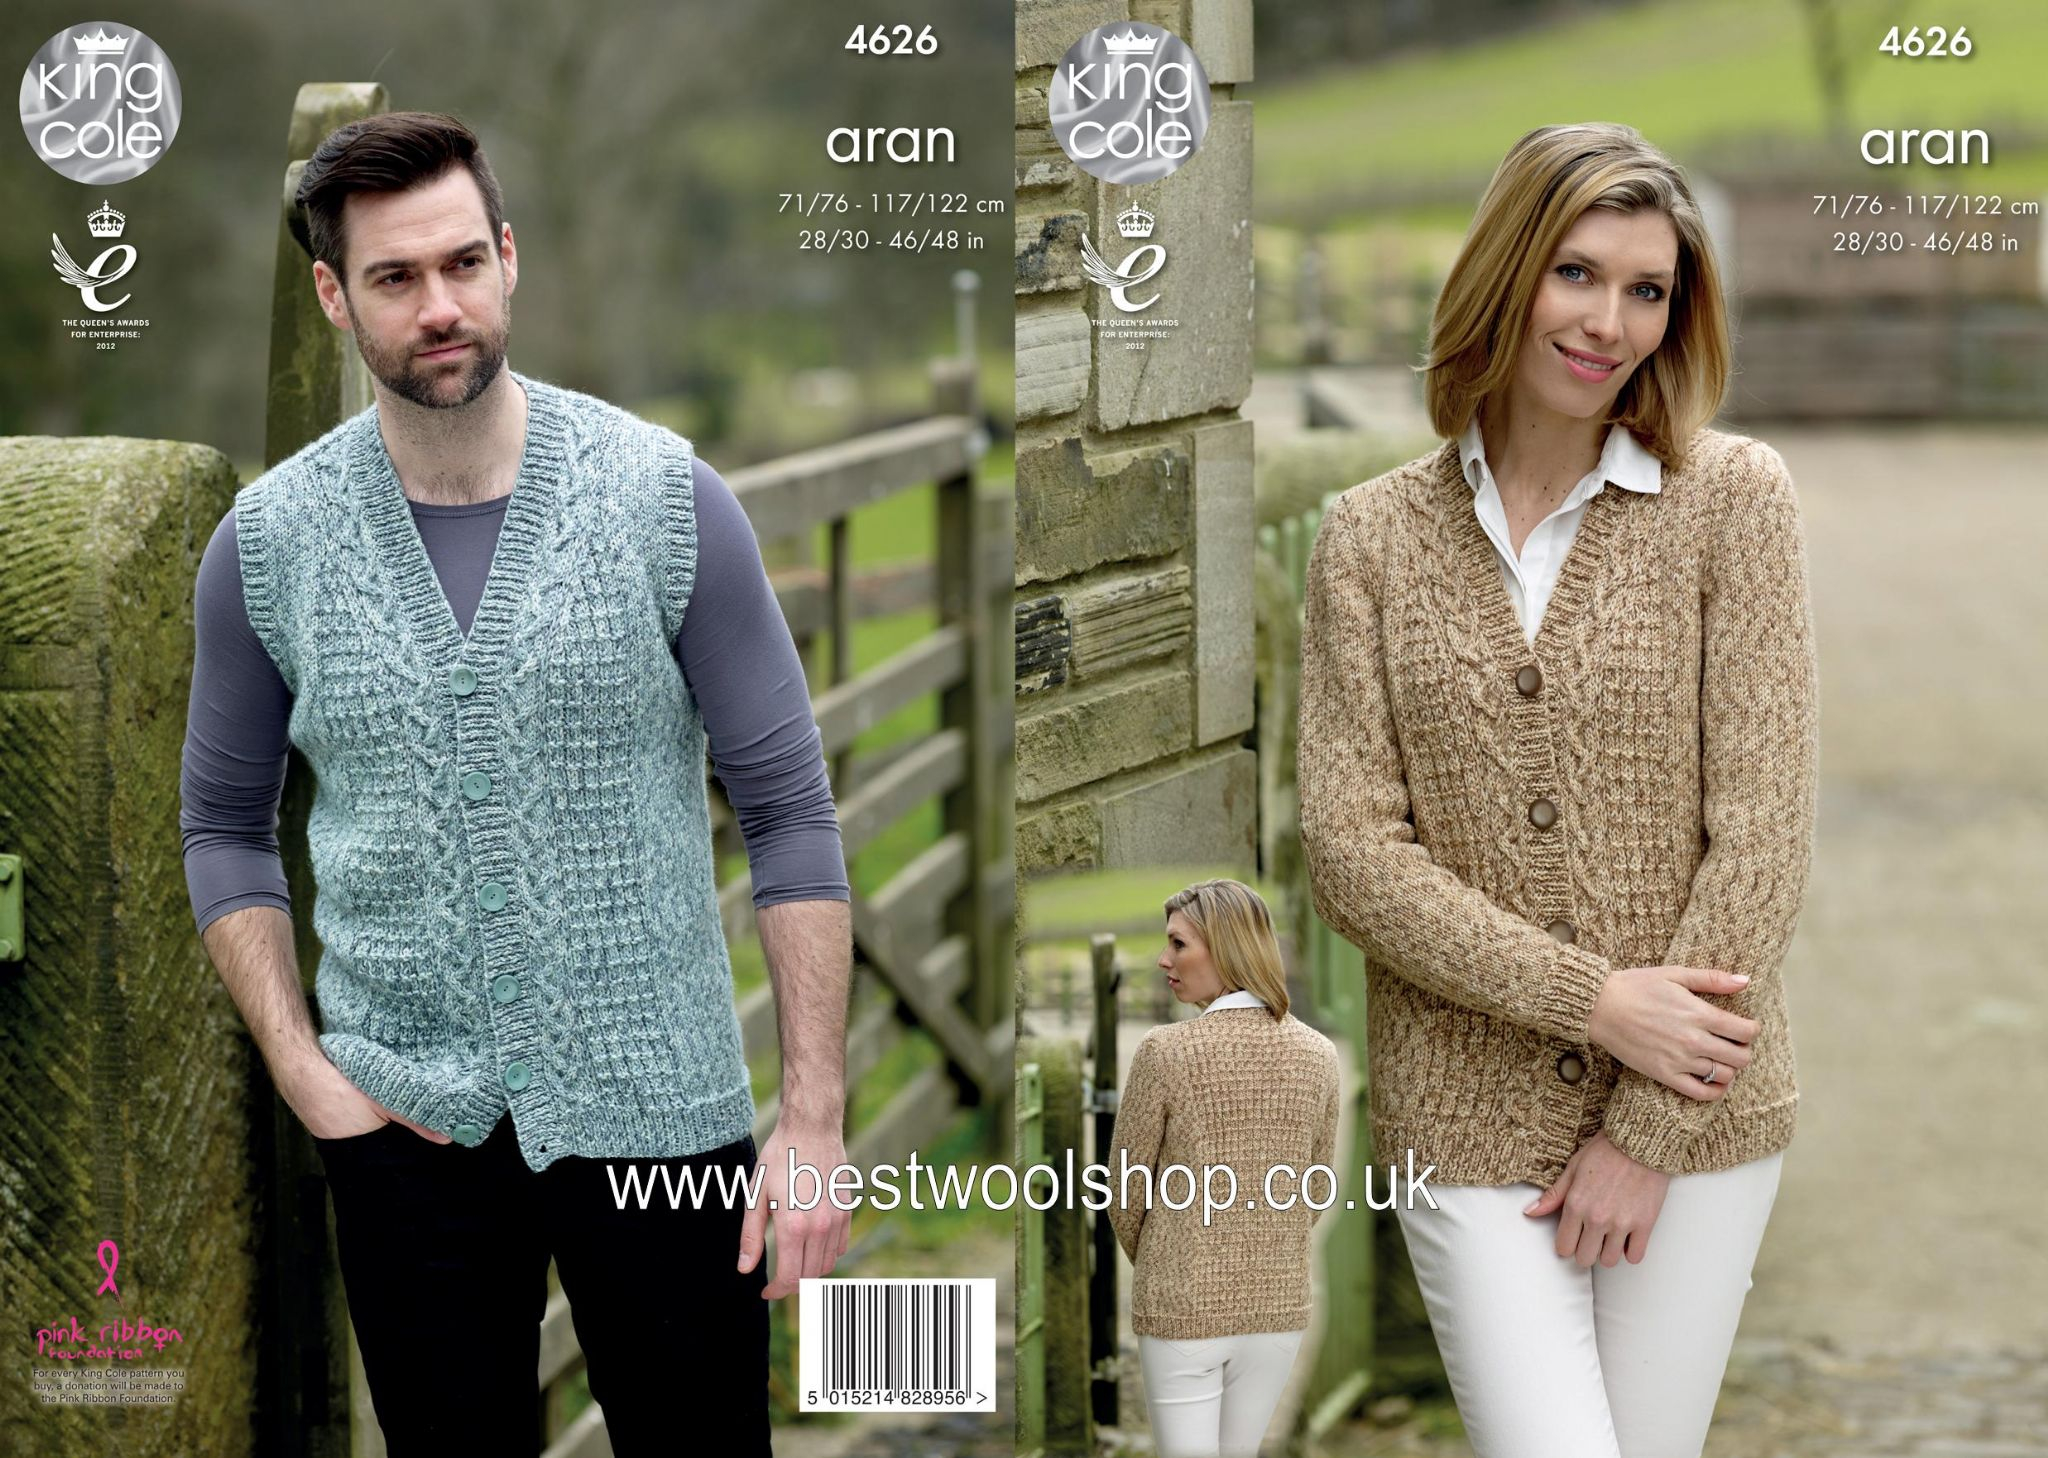 Knitting Patterns Aran 4626 King Cole Fashion Aran Combo Mens Ladies V Neck Cardigan Wasitcoat Knitting Pattern To Fit Chest 28 To 48